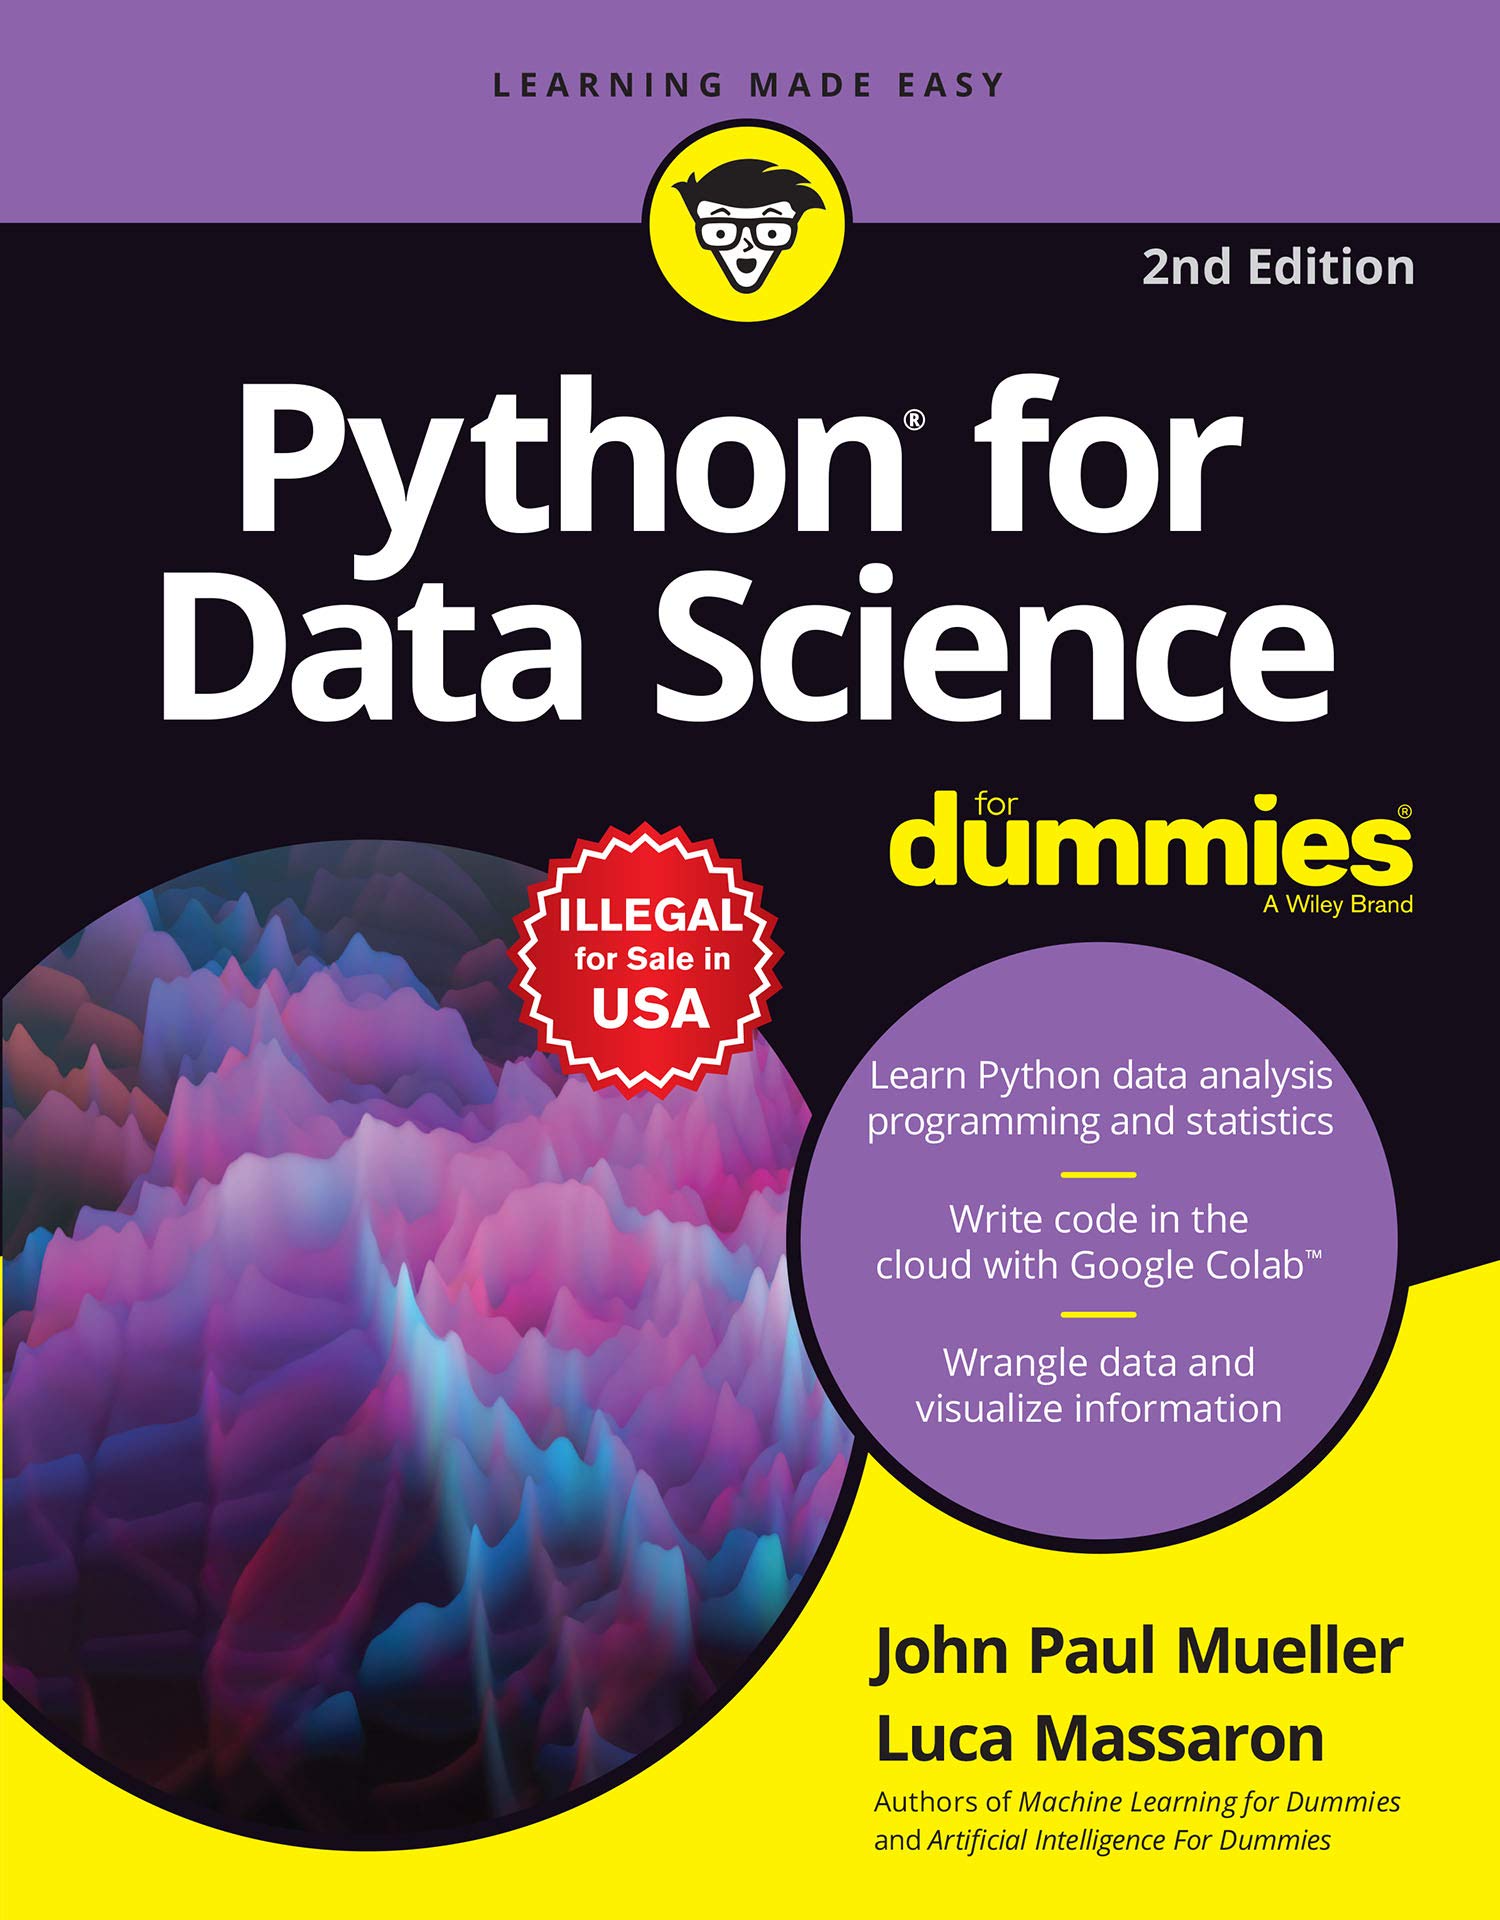 [PDF] Download Python for Data Science For Dummies by John and Luca Book pdf